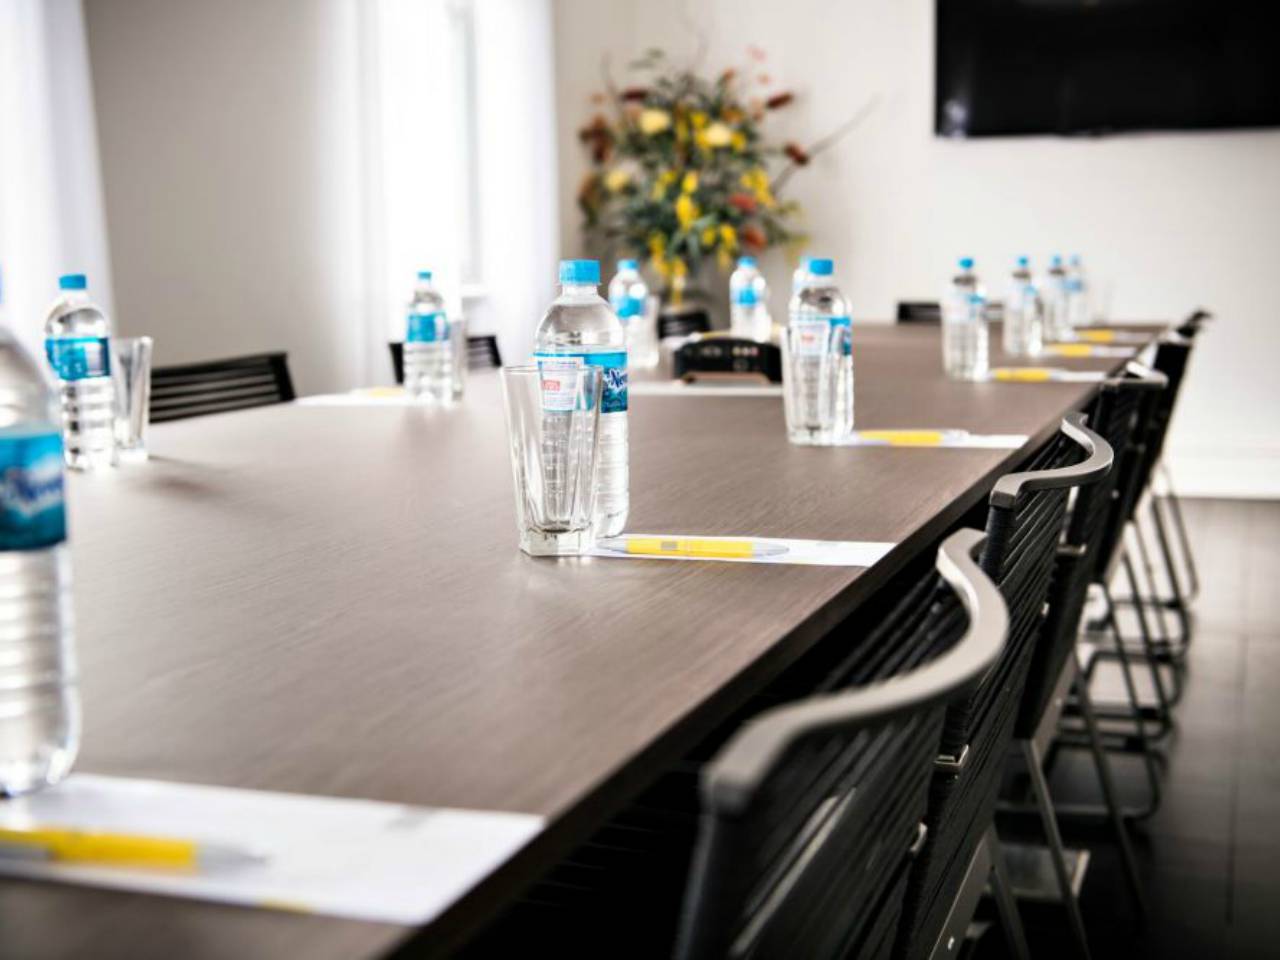 Meeting Table With Bottles Of Water, Ready For A Team Meeting.